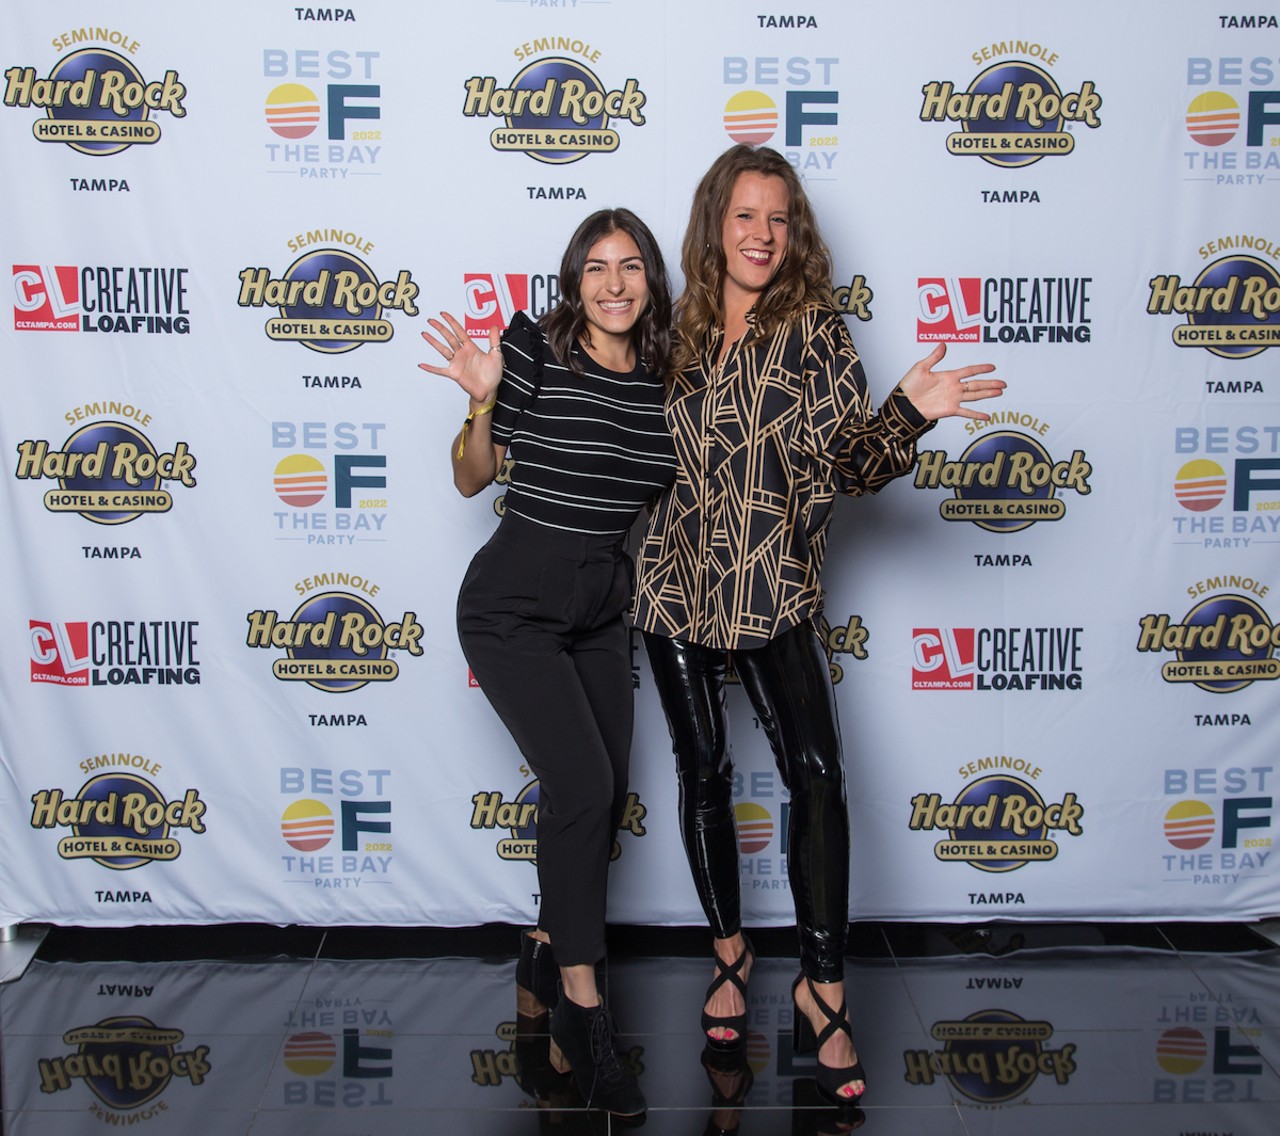 Everyone who stepped into Creative Loafing's Best of the Bay 2022 photo booth